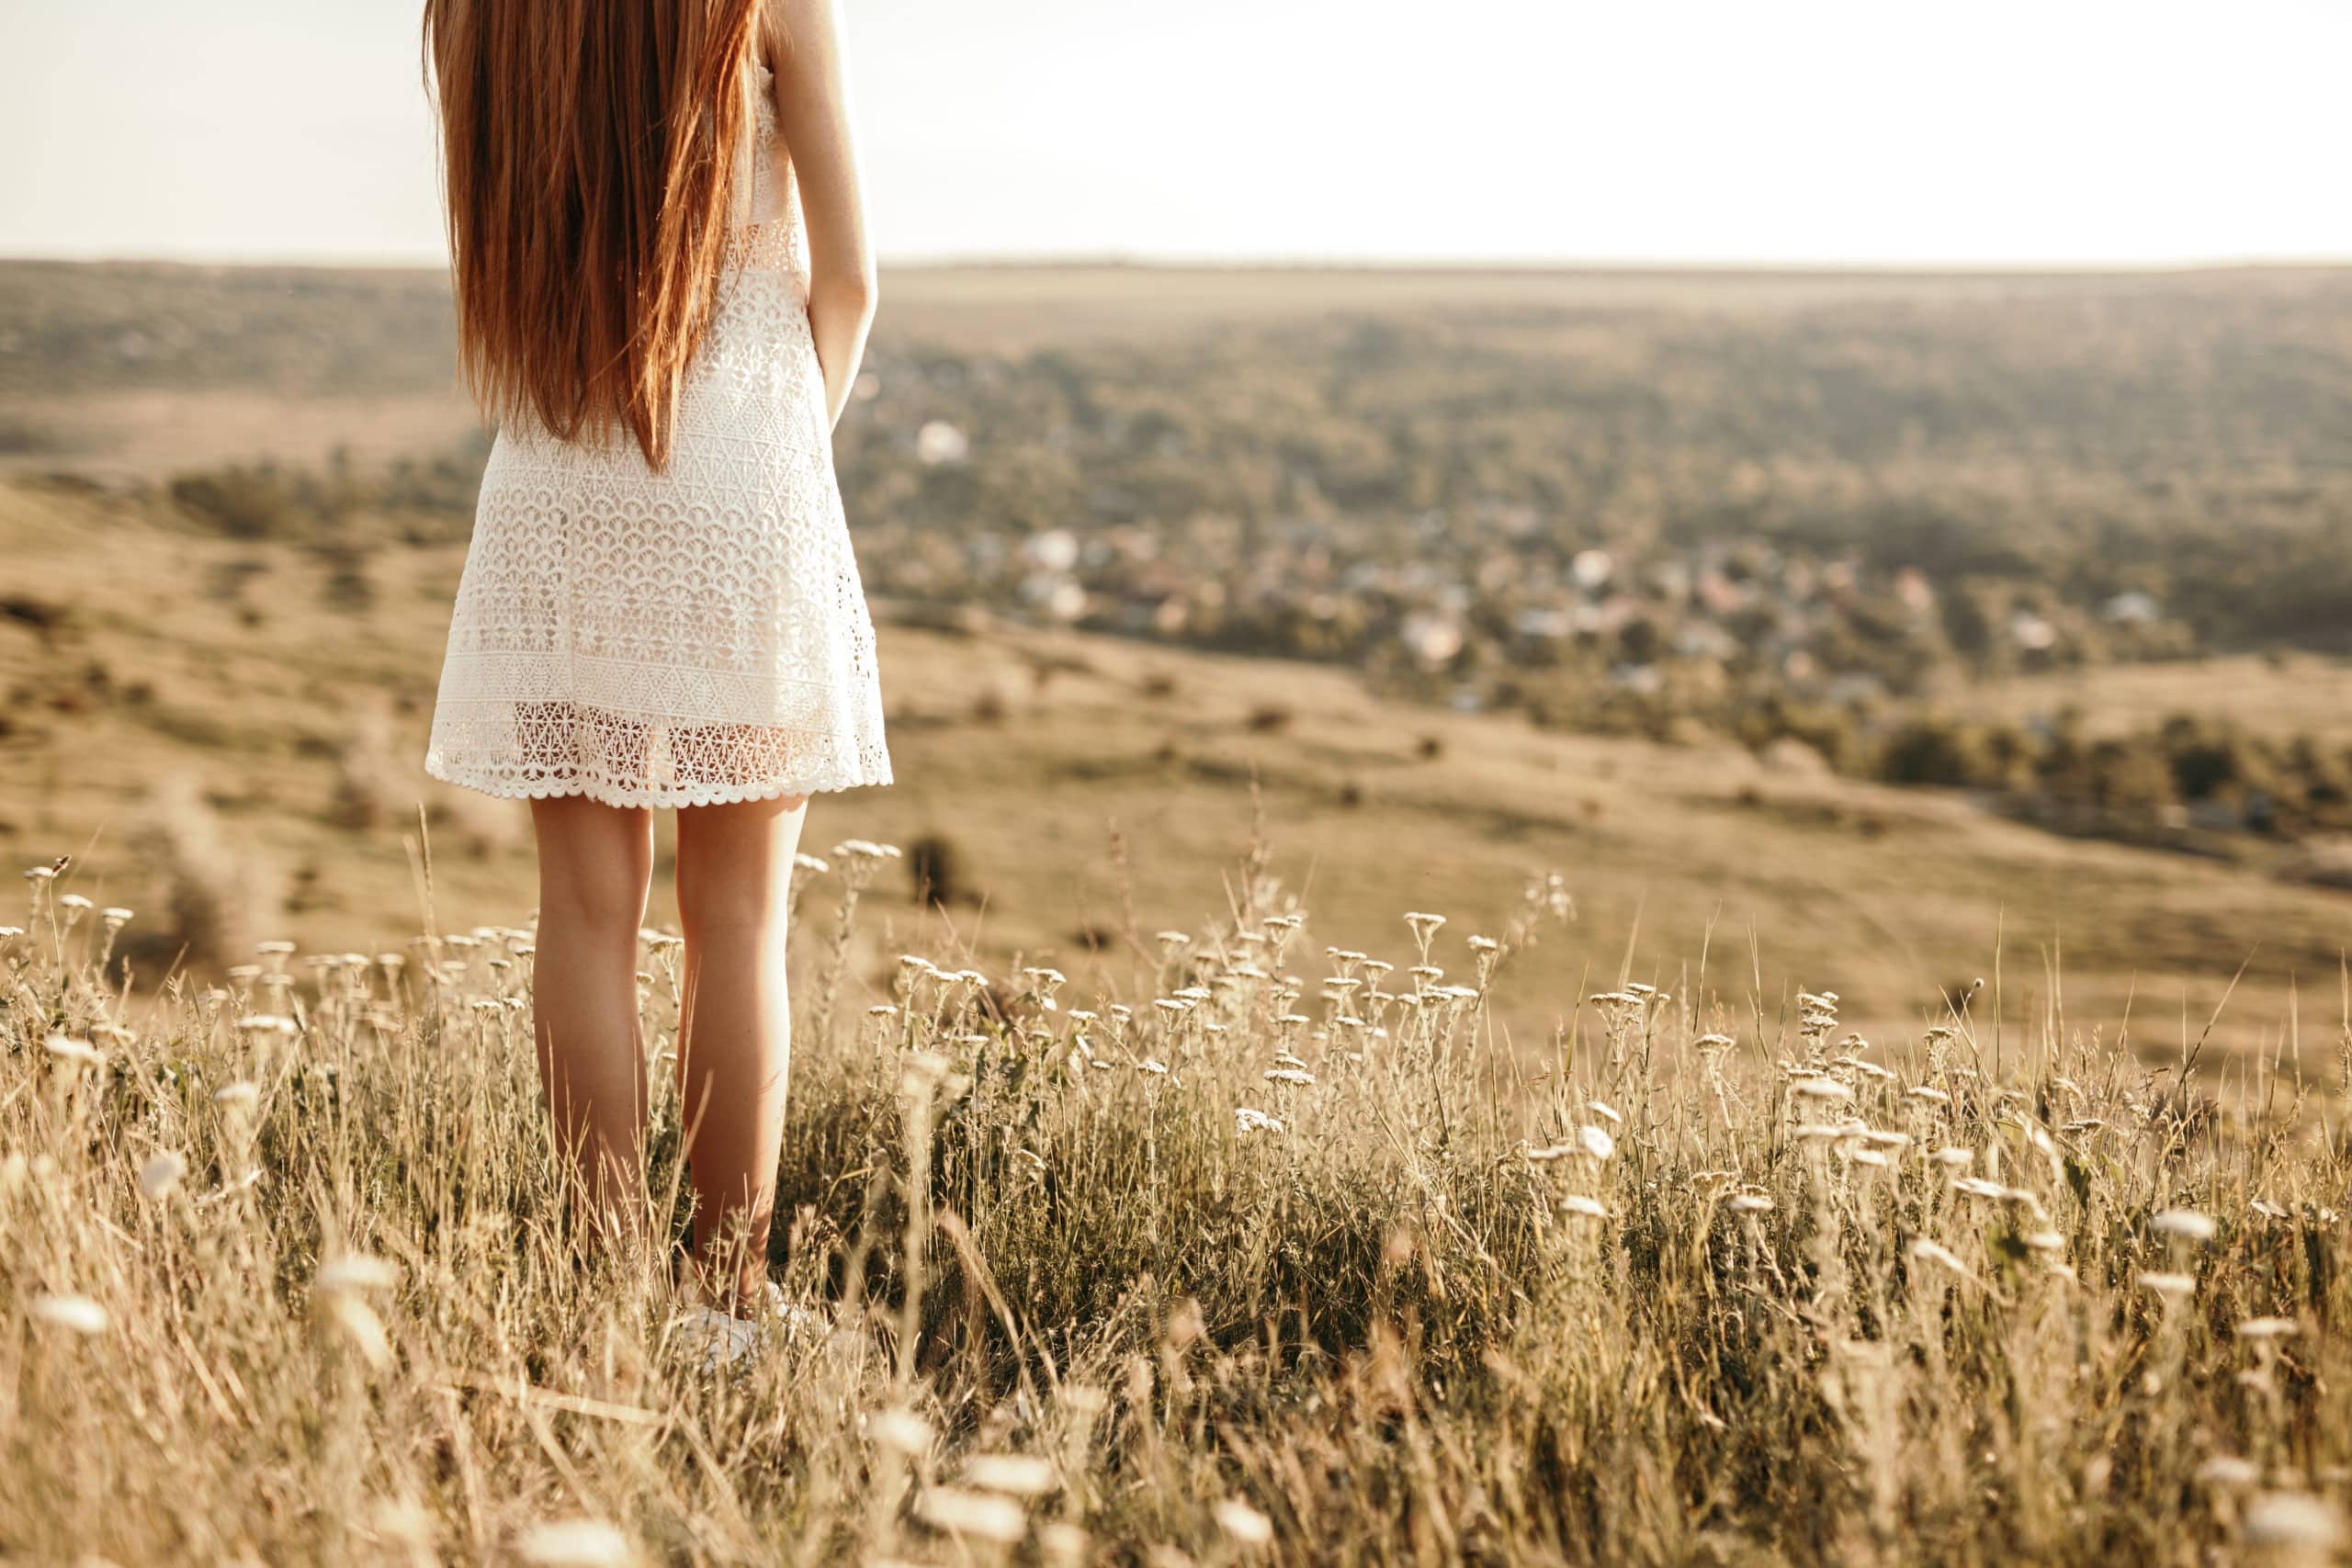 Lonely young woman in white dress standing in the field